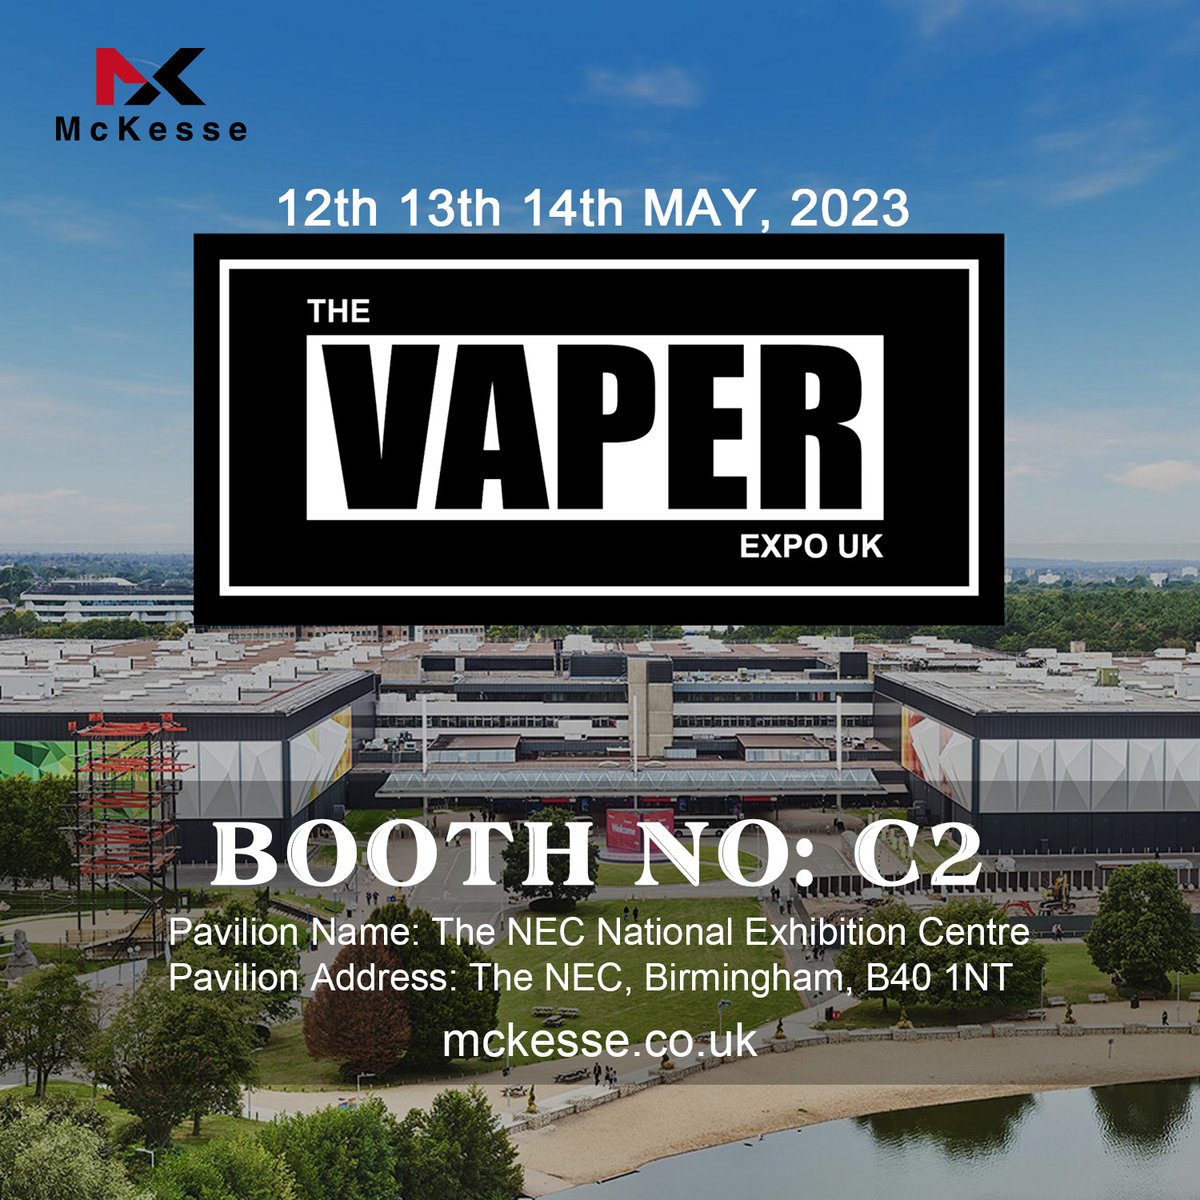 😎Get ready to experience the biggest and most spectacular vaping show in Europe this year. 
#VaperExpoUK
#vaperexpo
#vape2023
#vape
#vaperexpouk
#vapecommunity
#vapeadvocacy 
#vaperexpouk 
#vaperexpouk2023 
#wereback
#vapercommunity 
#ukvapers 
#ukvapefam 
#vapeon 
#BIRMINGHAM